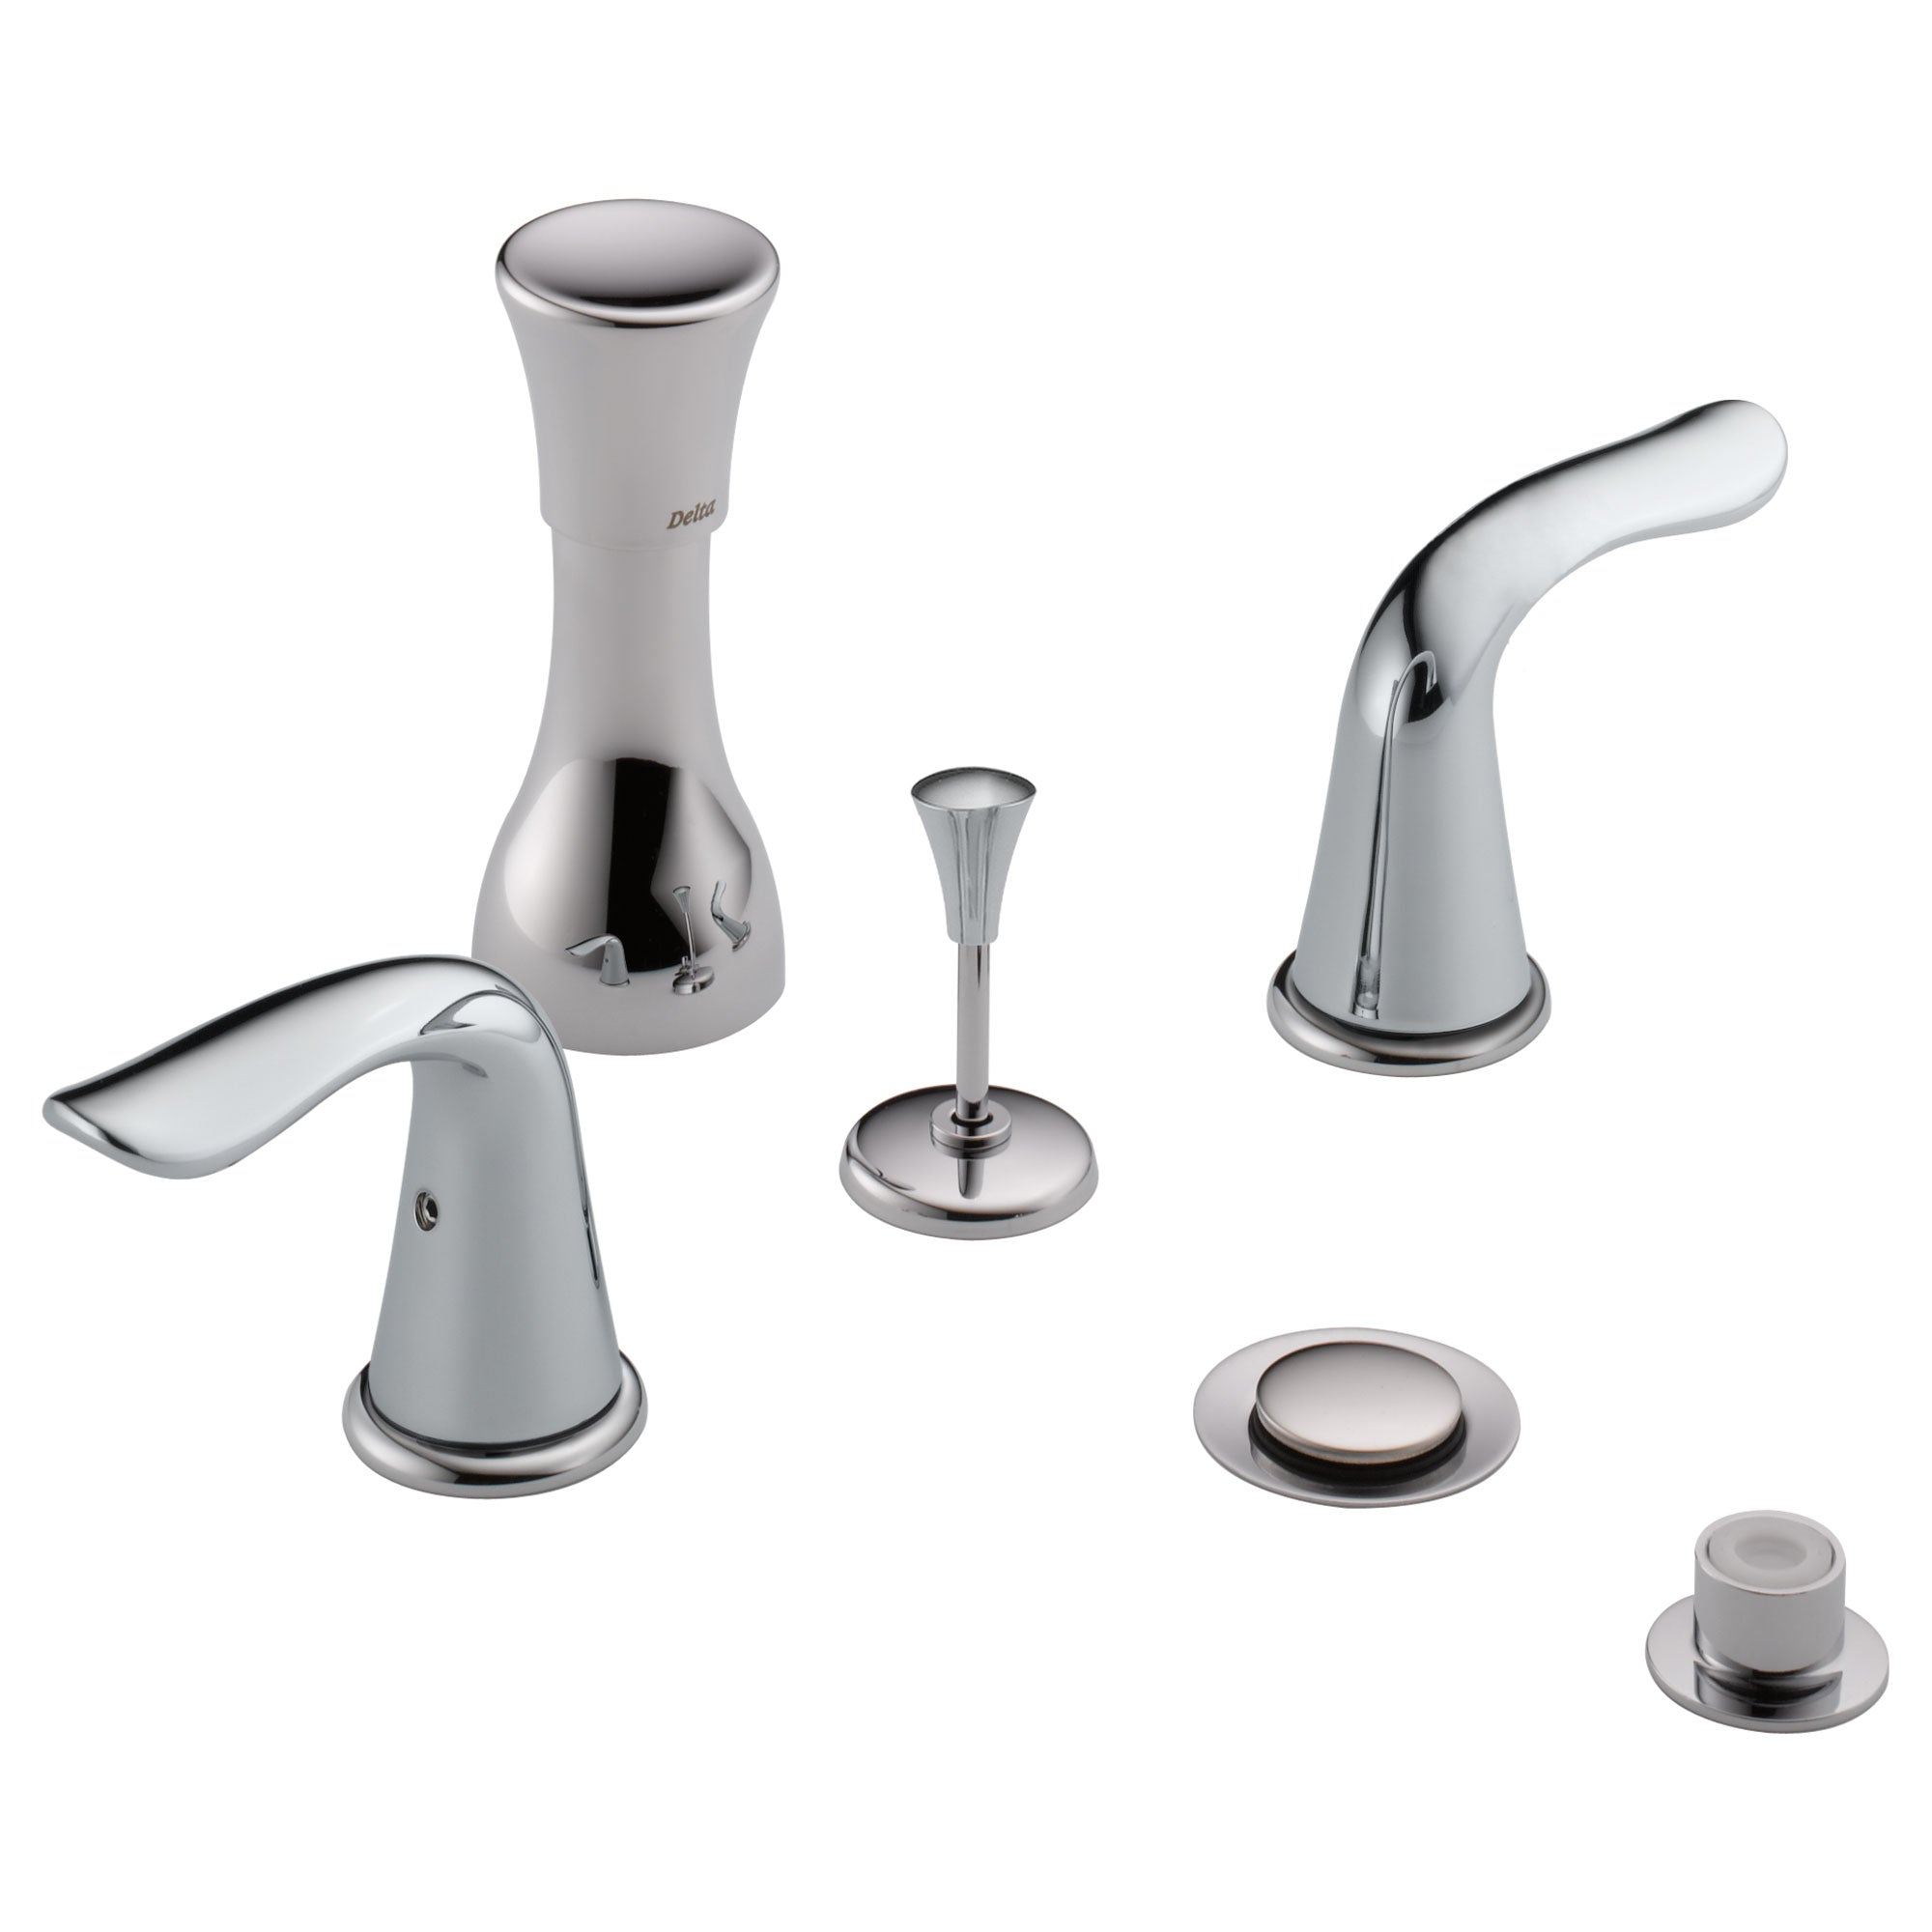 Delta Chrome Finish Lahara Collection 4 Hole 6" or 8" Installation Bathroom Bidet Faucet with Metal Pop-up COMPLETE ITEM Includes Two Lever Handles D1750V